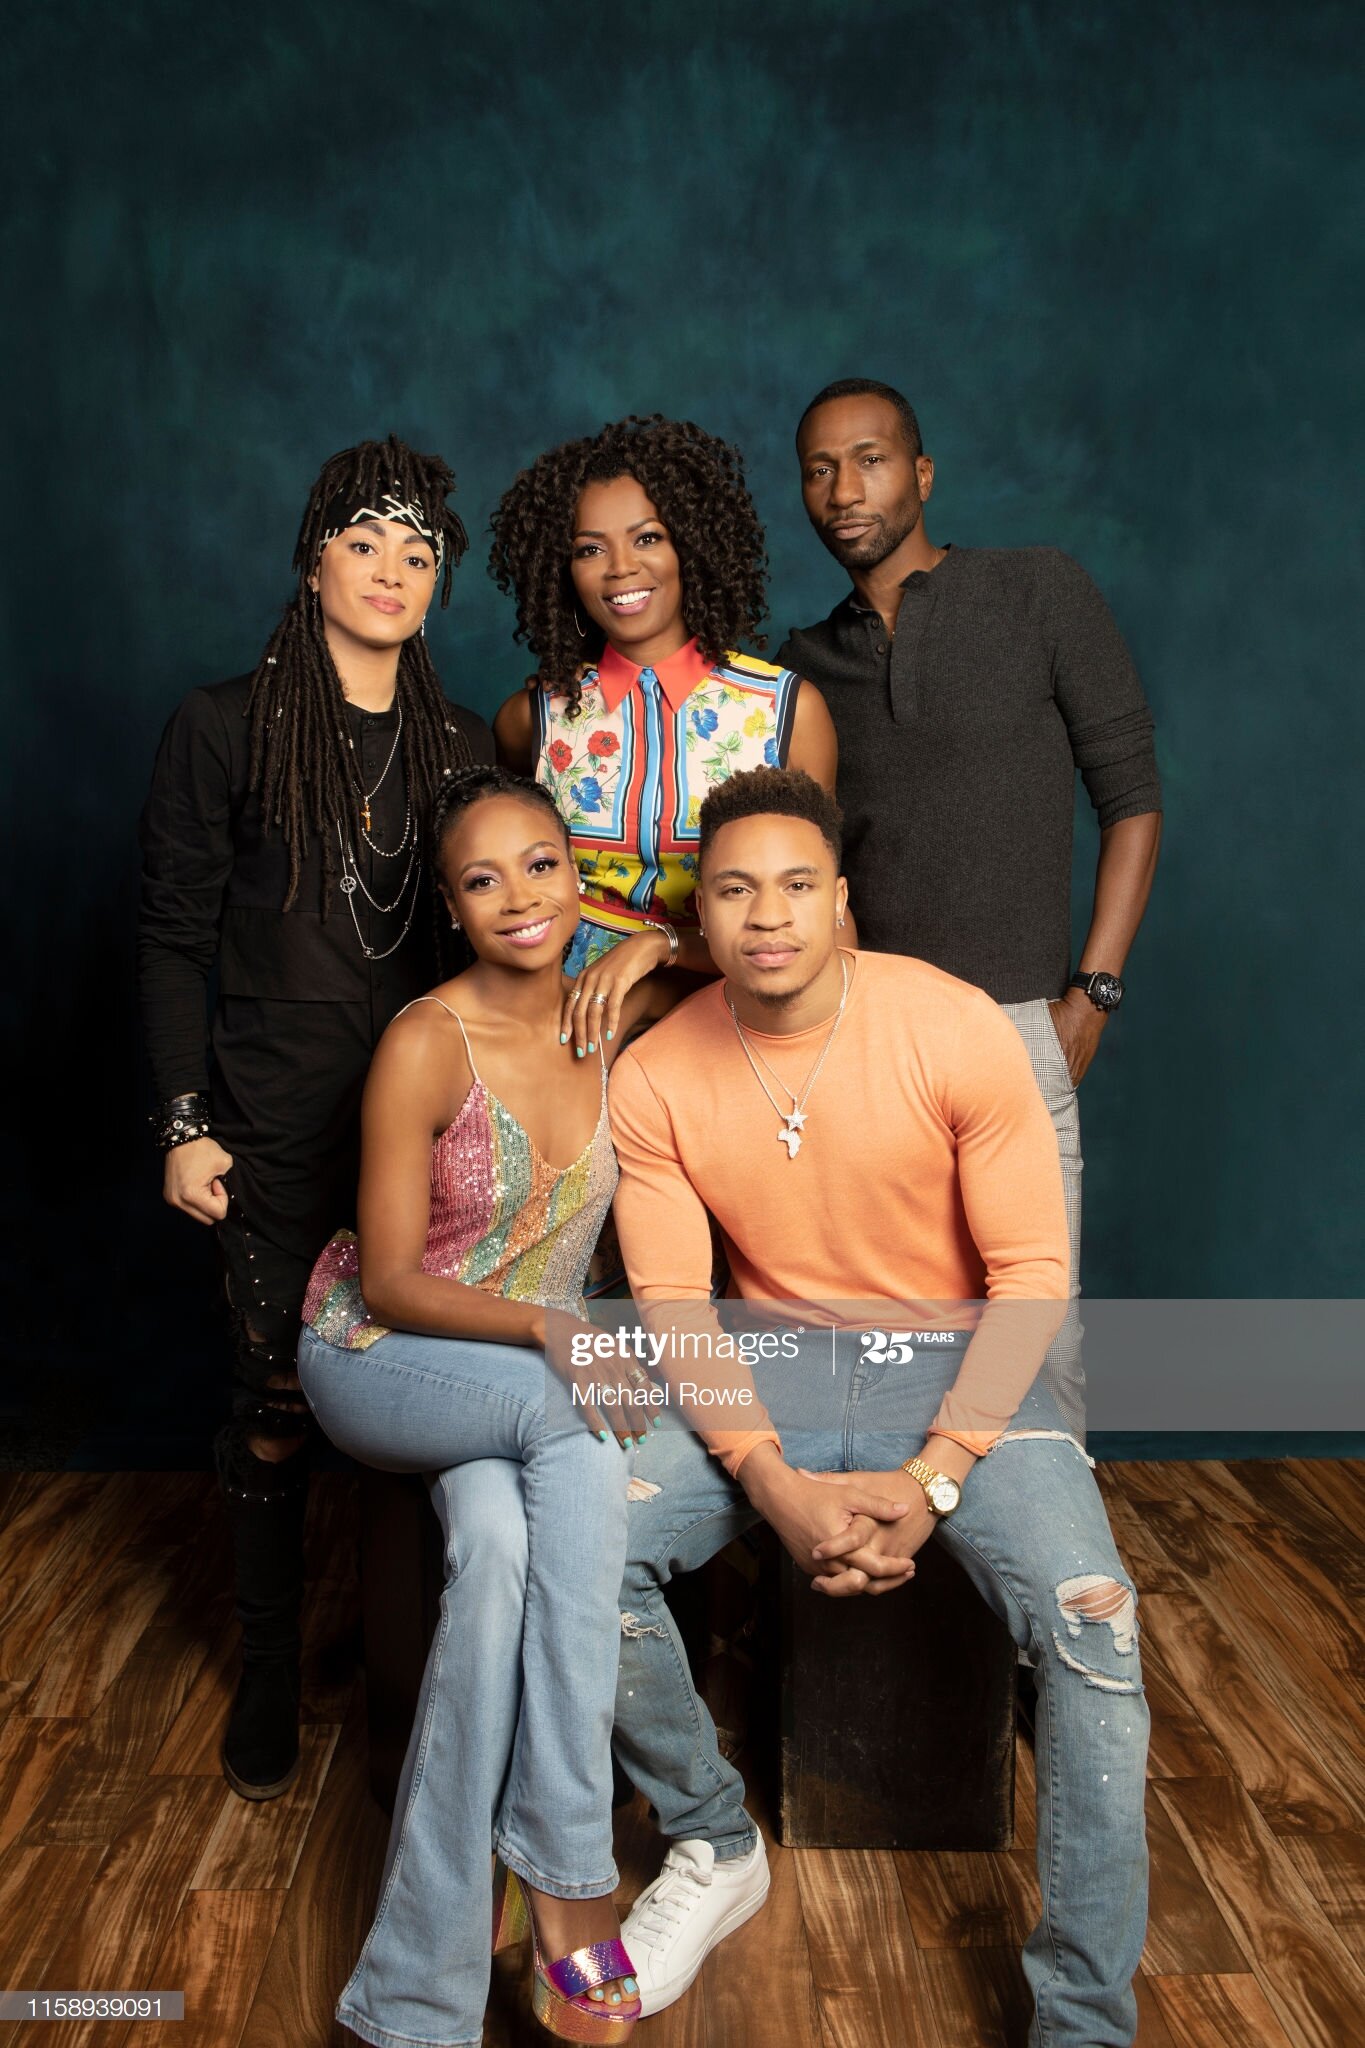  Actors Amber Whittington, Vanessa A. Williams, Leon Robinson, Rotimi and Sheria Irving from 'A Luv Tale' are photographed for Essence.com on July 6, 2019 at 2019 Essence Festival in New Orleans, Louisiana. (Photo by Michael Rowe/Contour by Getty Ima